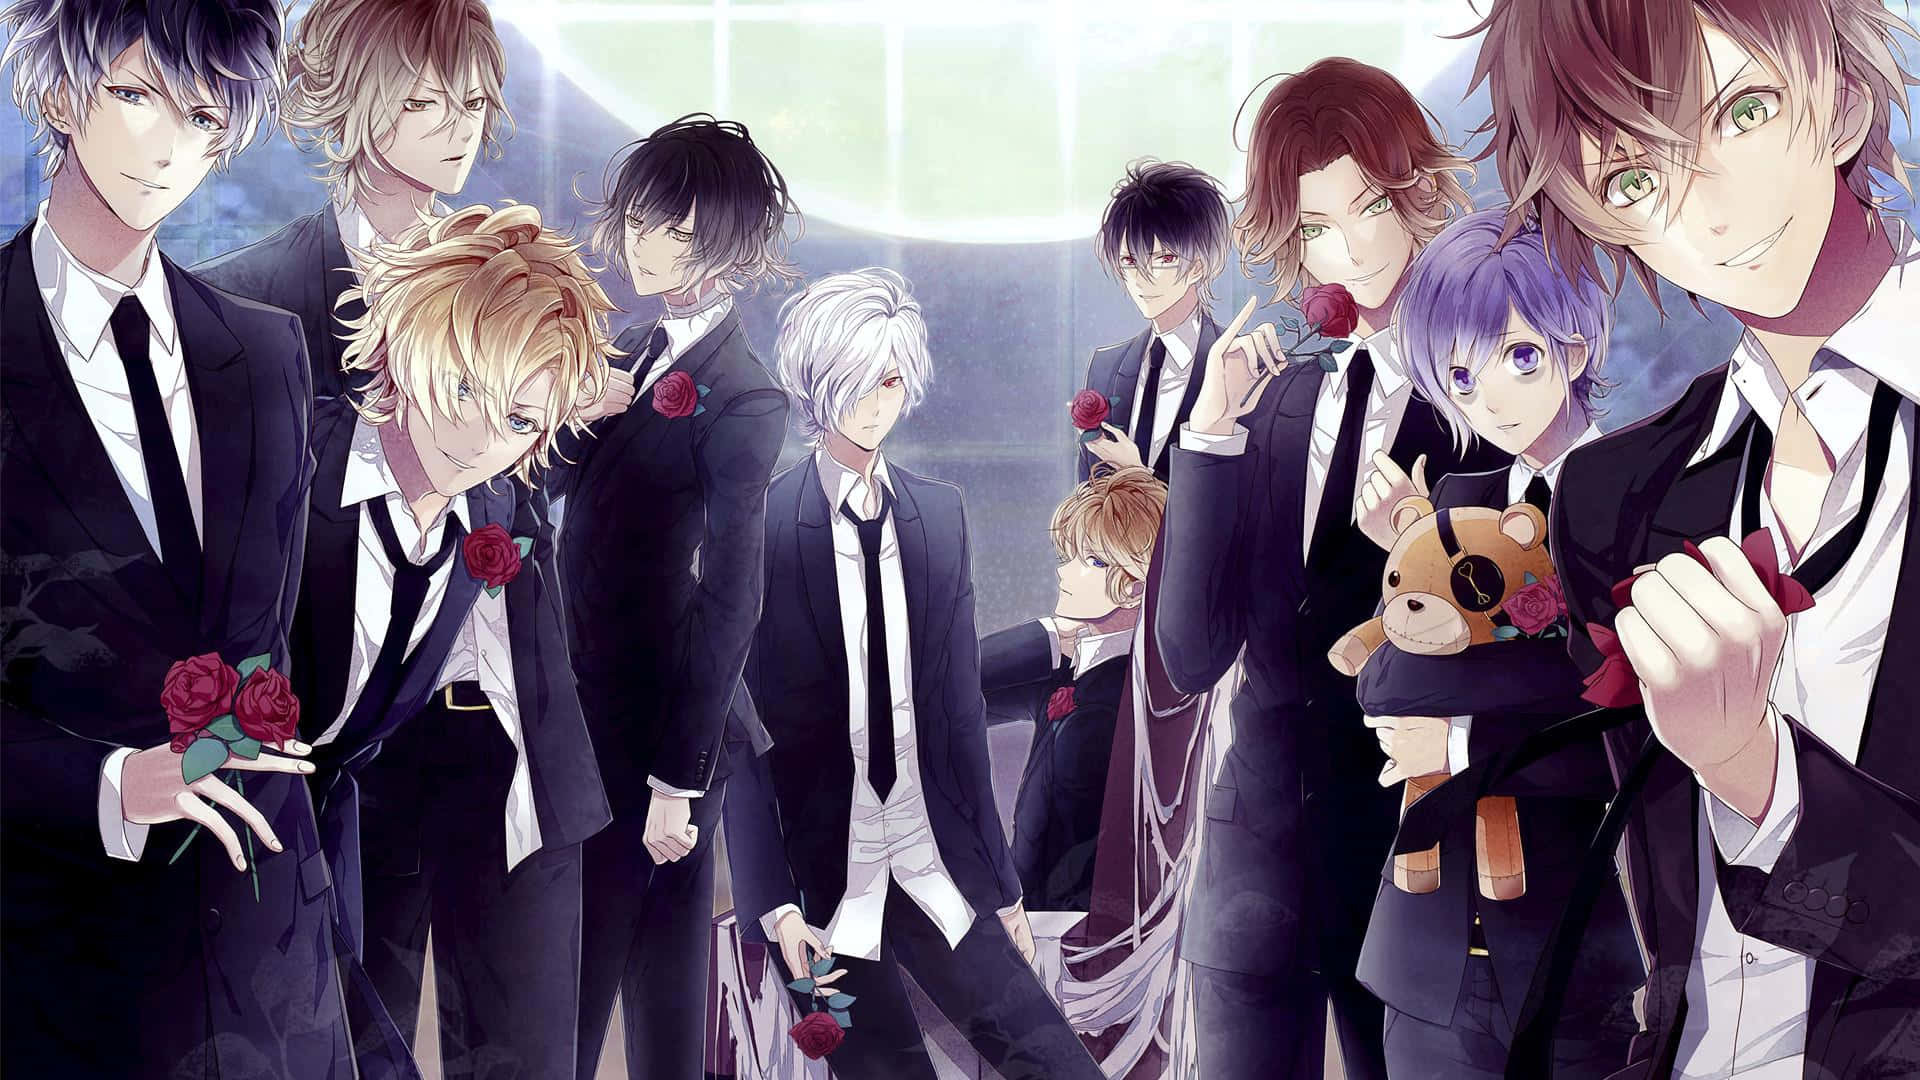 Chibi style Diabolik Lovers characters presenting their love for each other